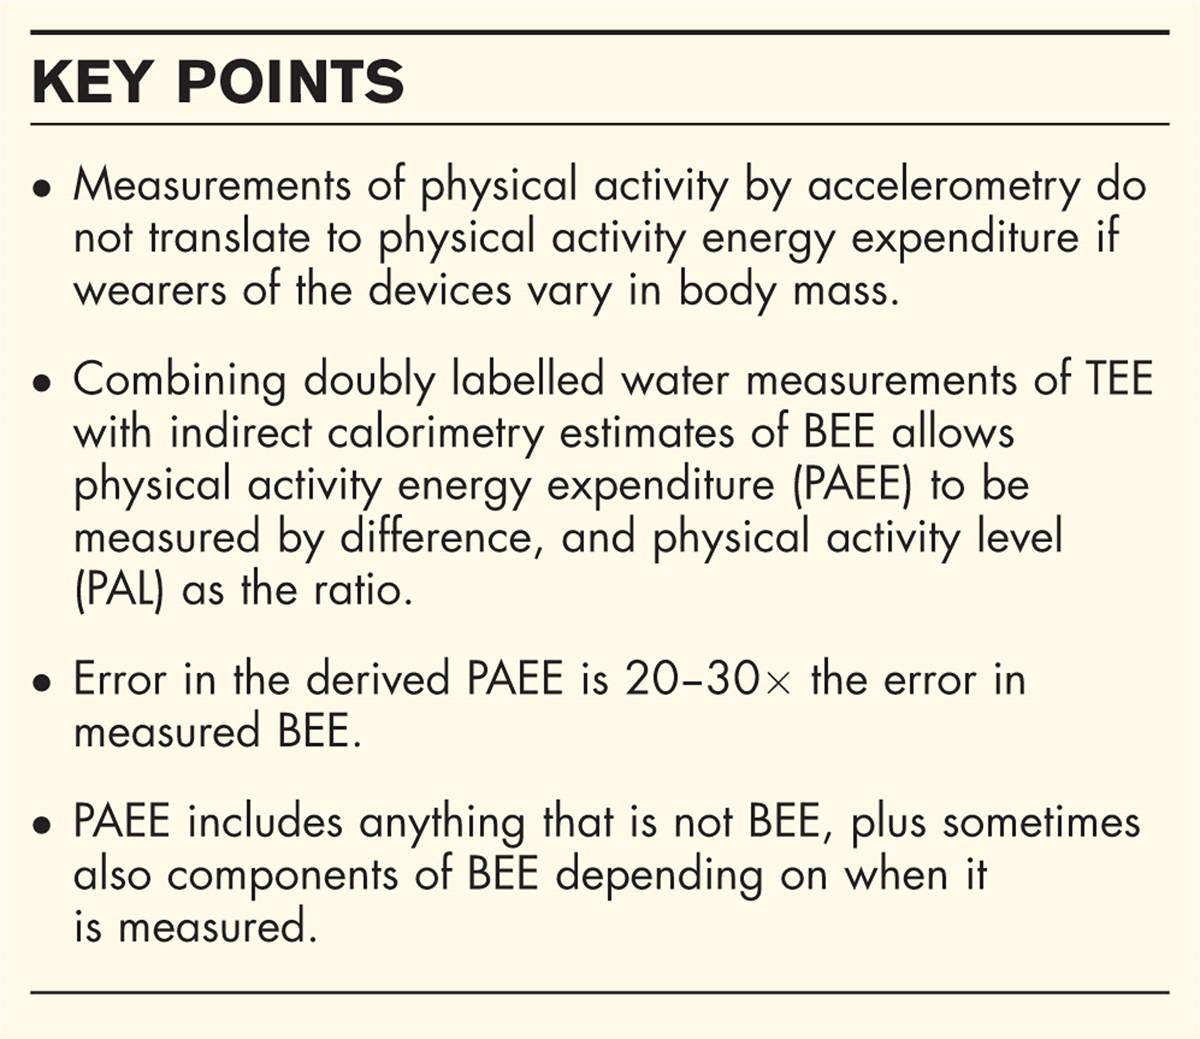 Quantifying physical activity energy expenditure based on doubly labelled water and basal metabolism calorimetry: what are we actually measuring?